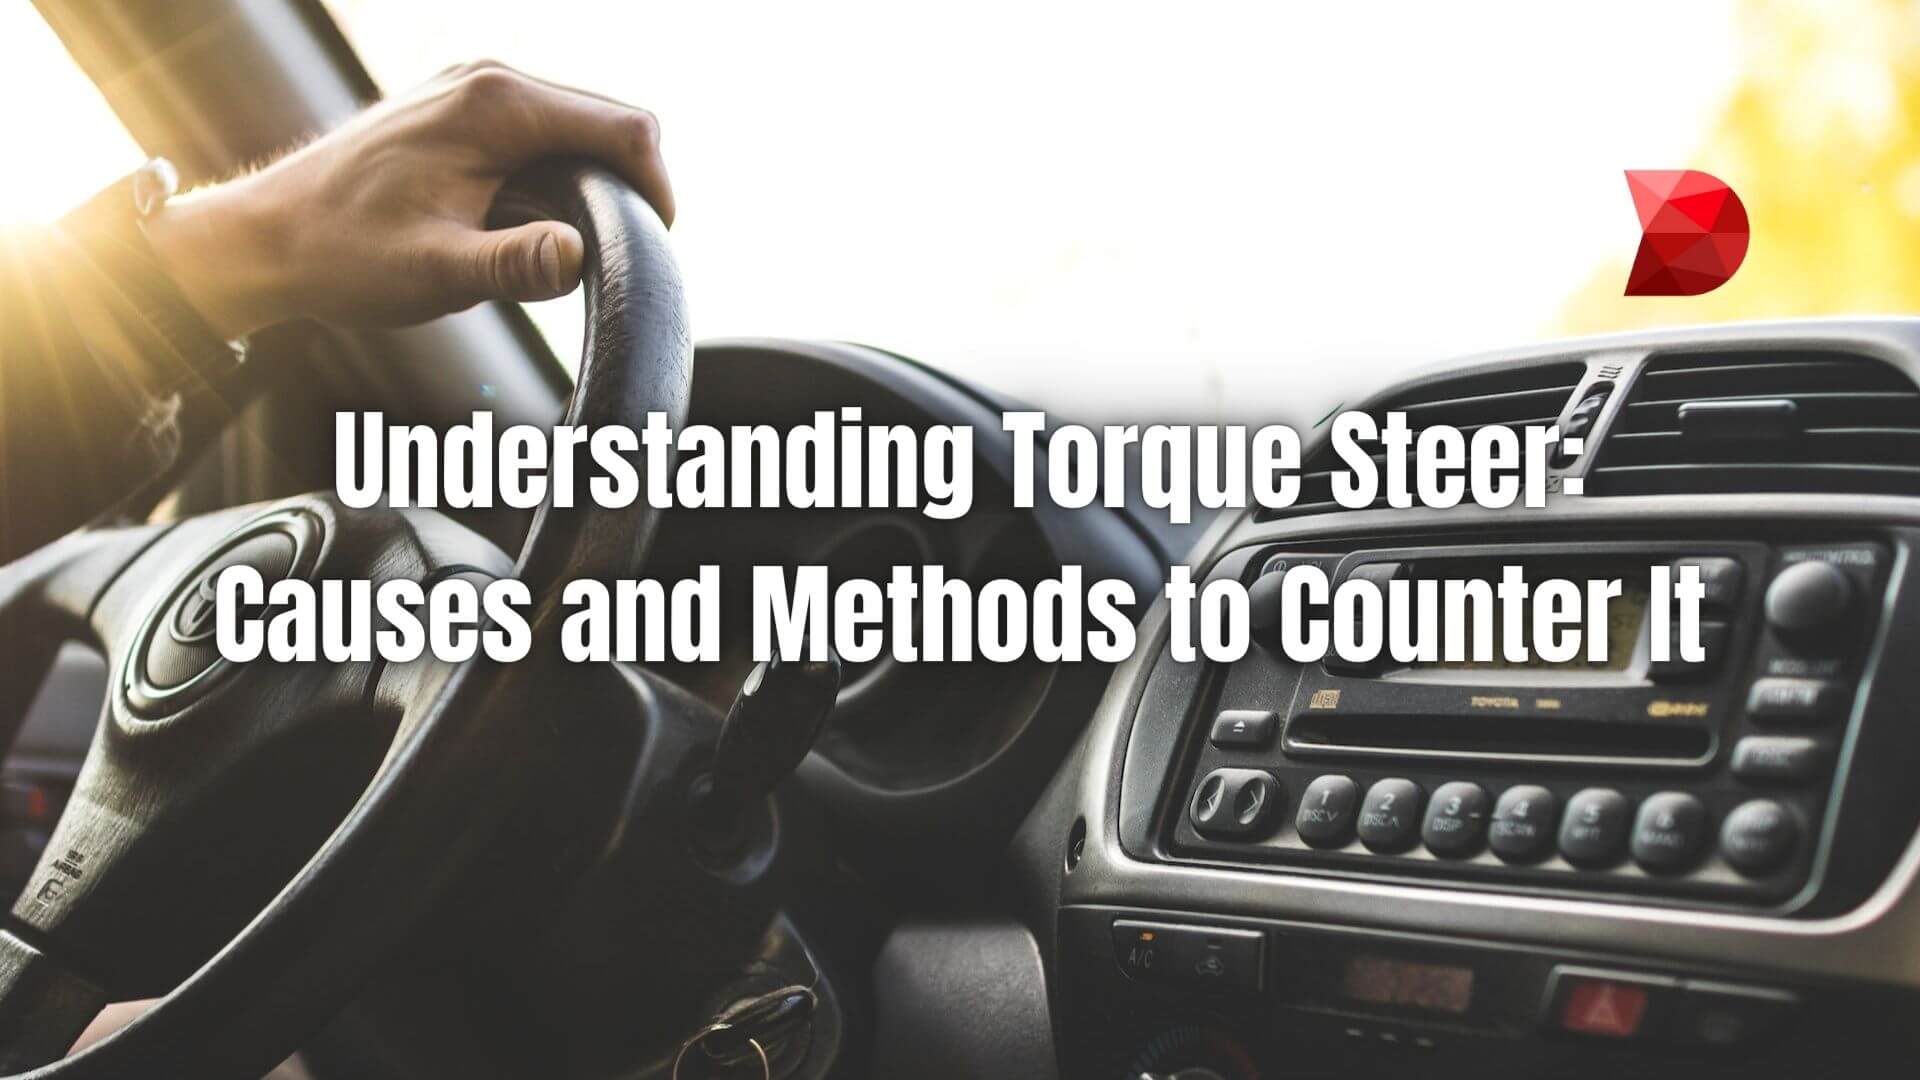 Torque steer is not a defect or flaw in your vehicle. Click here to learn about what causes it and the methods to counter it!